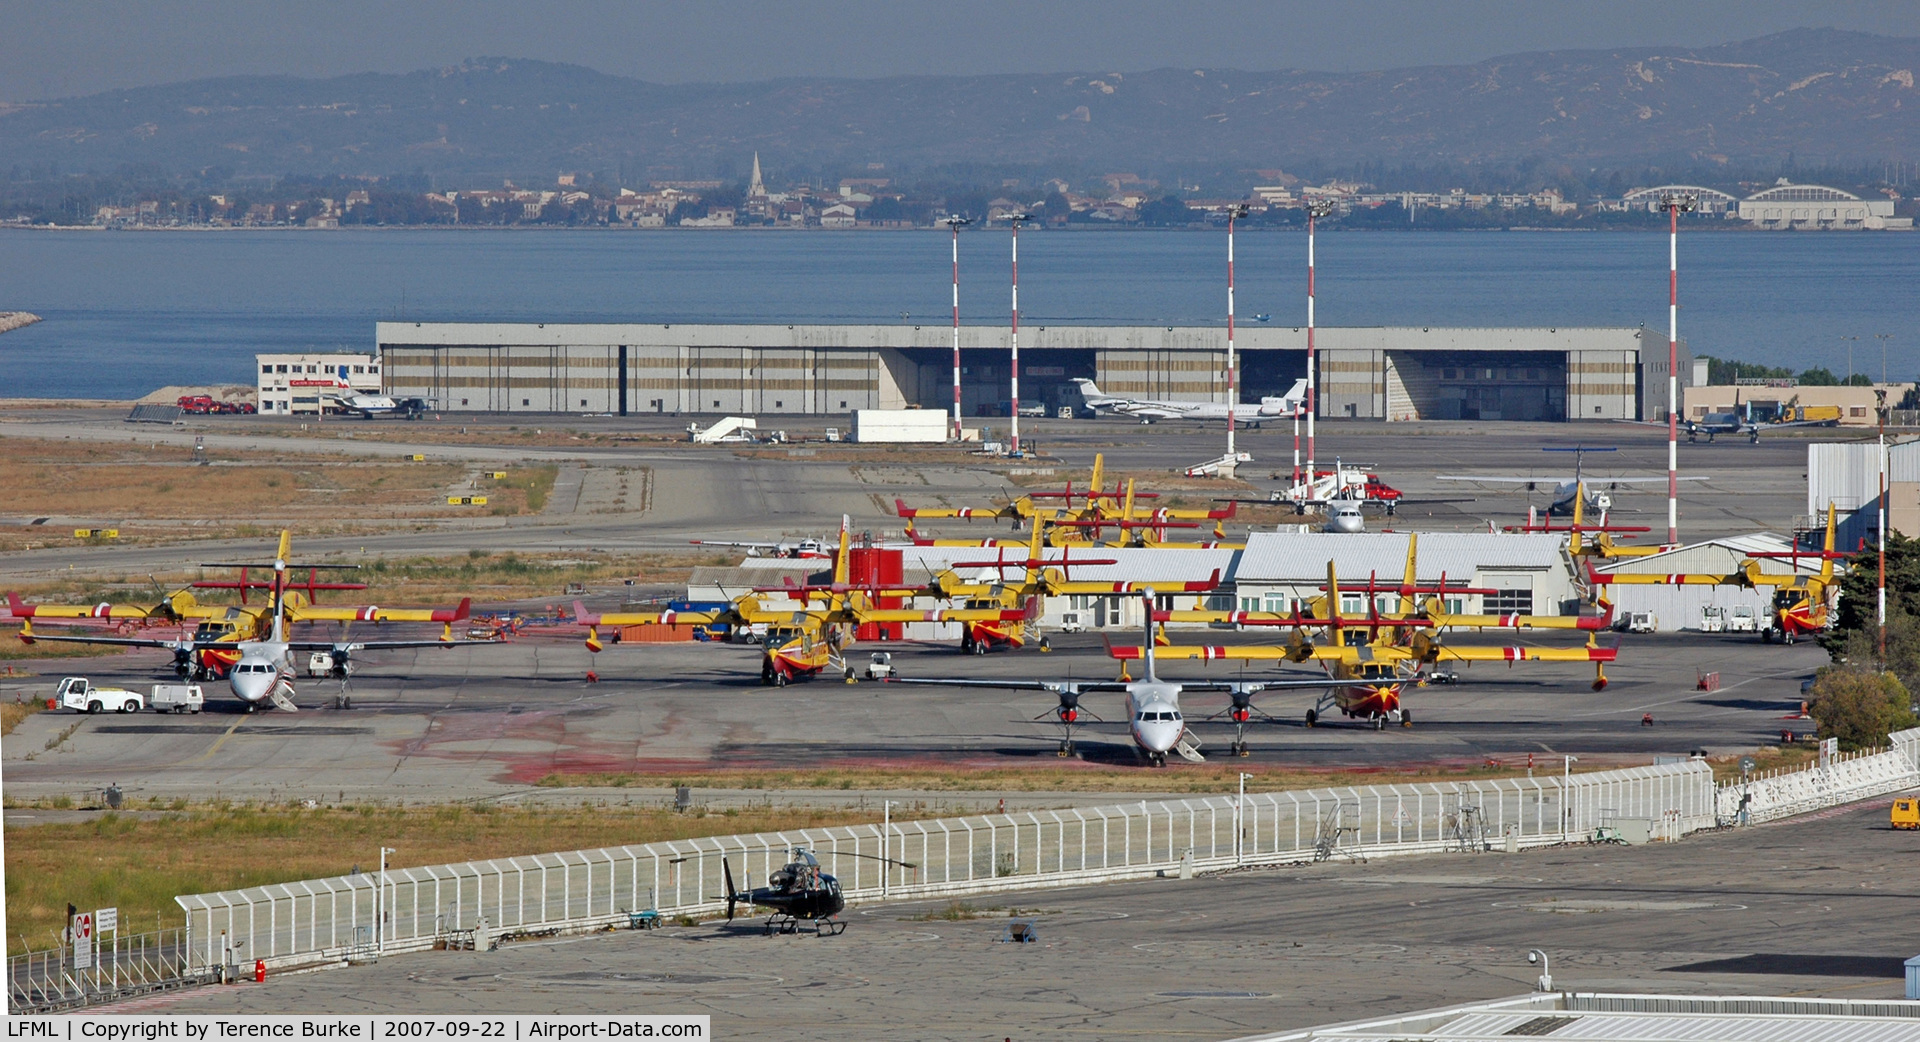 Marseille Provence Airport, Marseille France (LFML) - Airport View